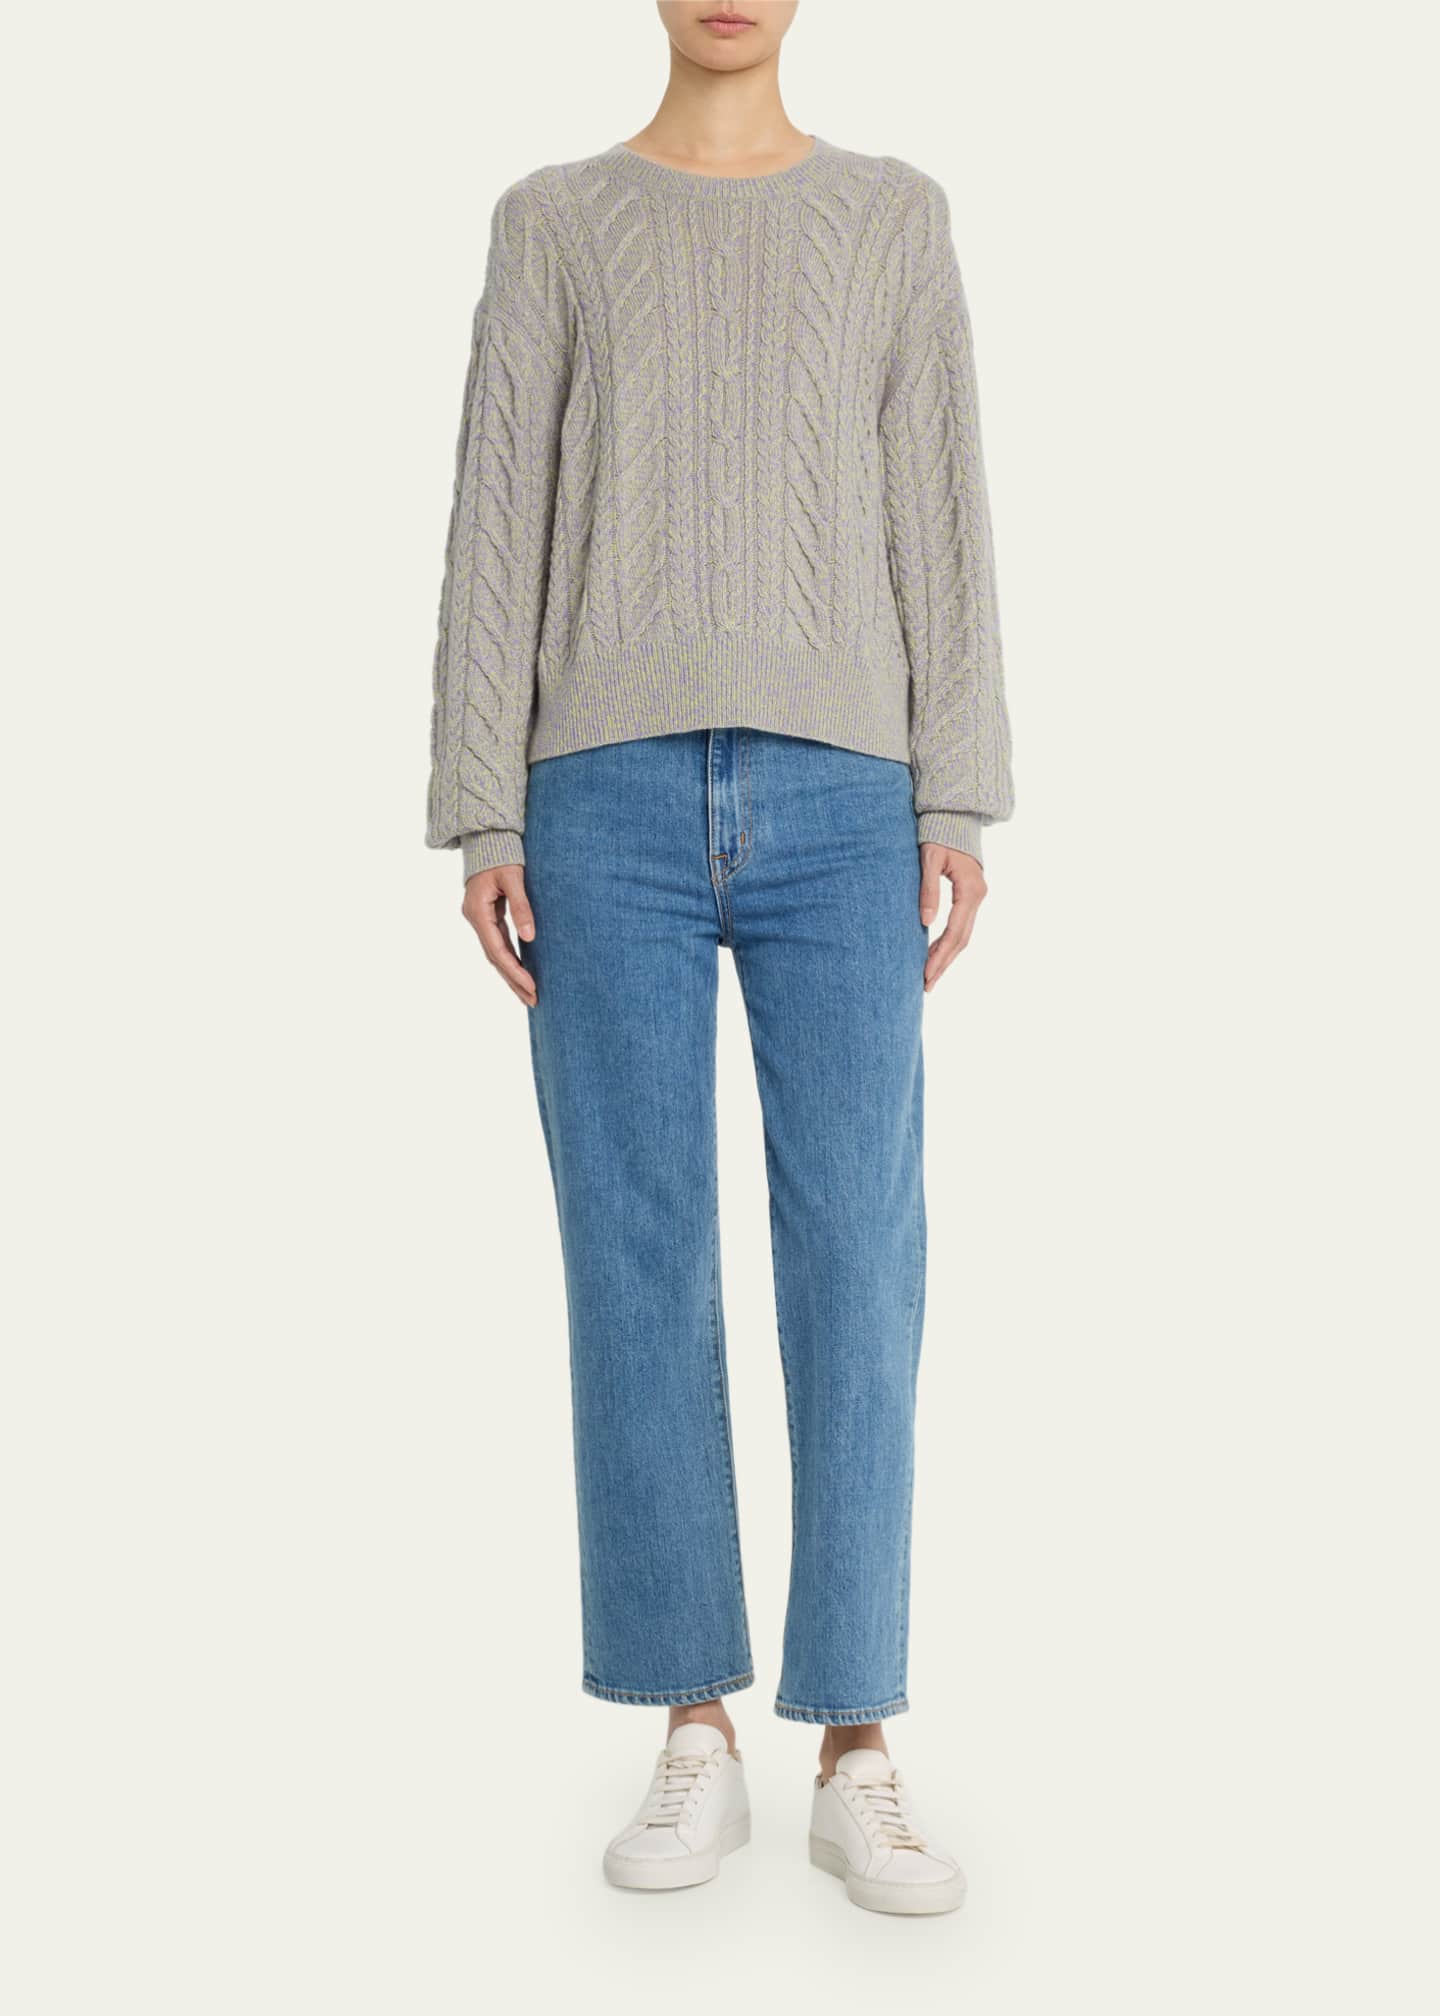 Guest in Residence Cashmere Marled Cable-Knit Sweater - Bergdorf Goodman